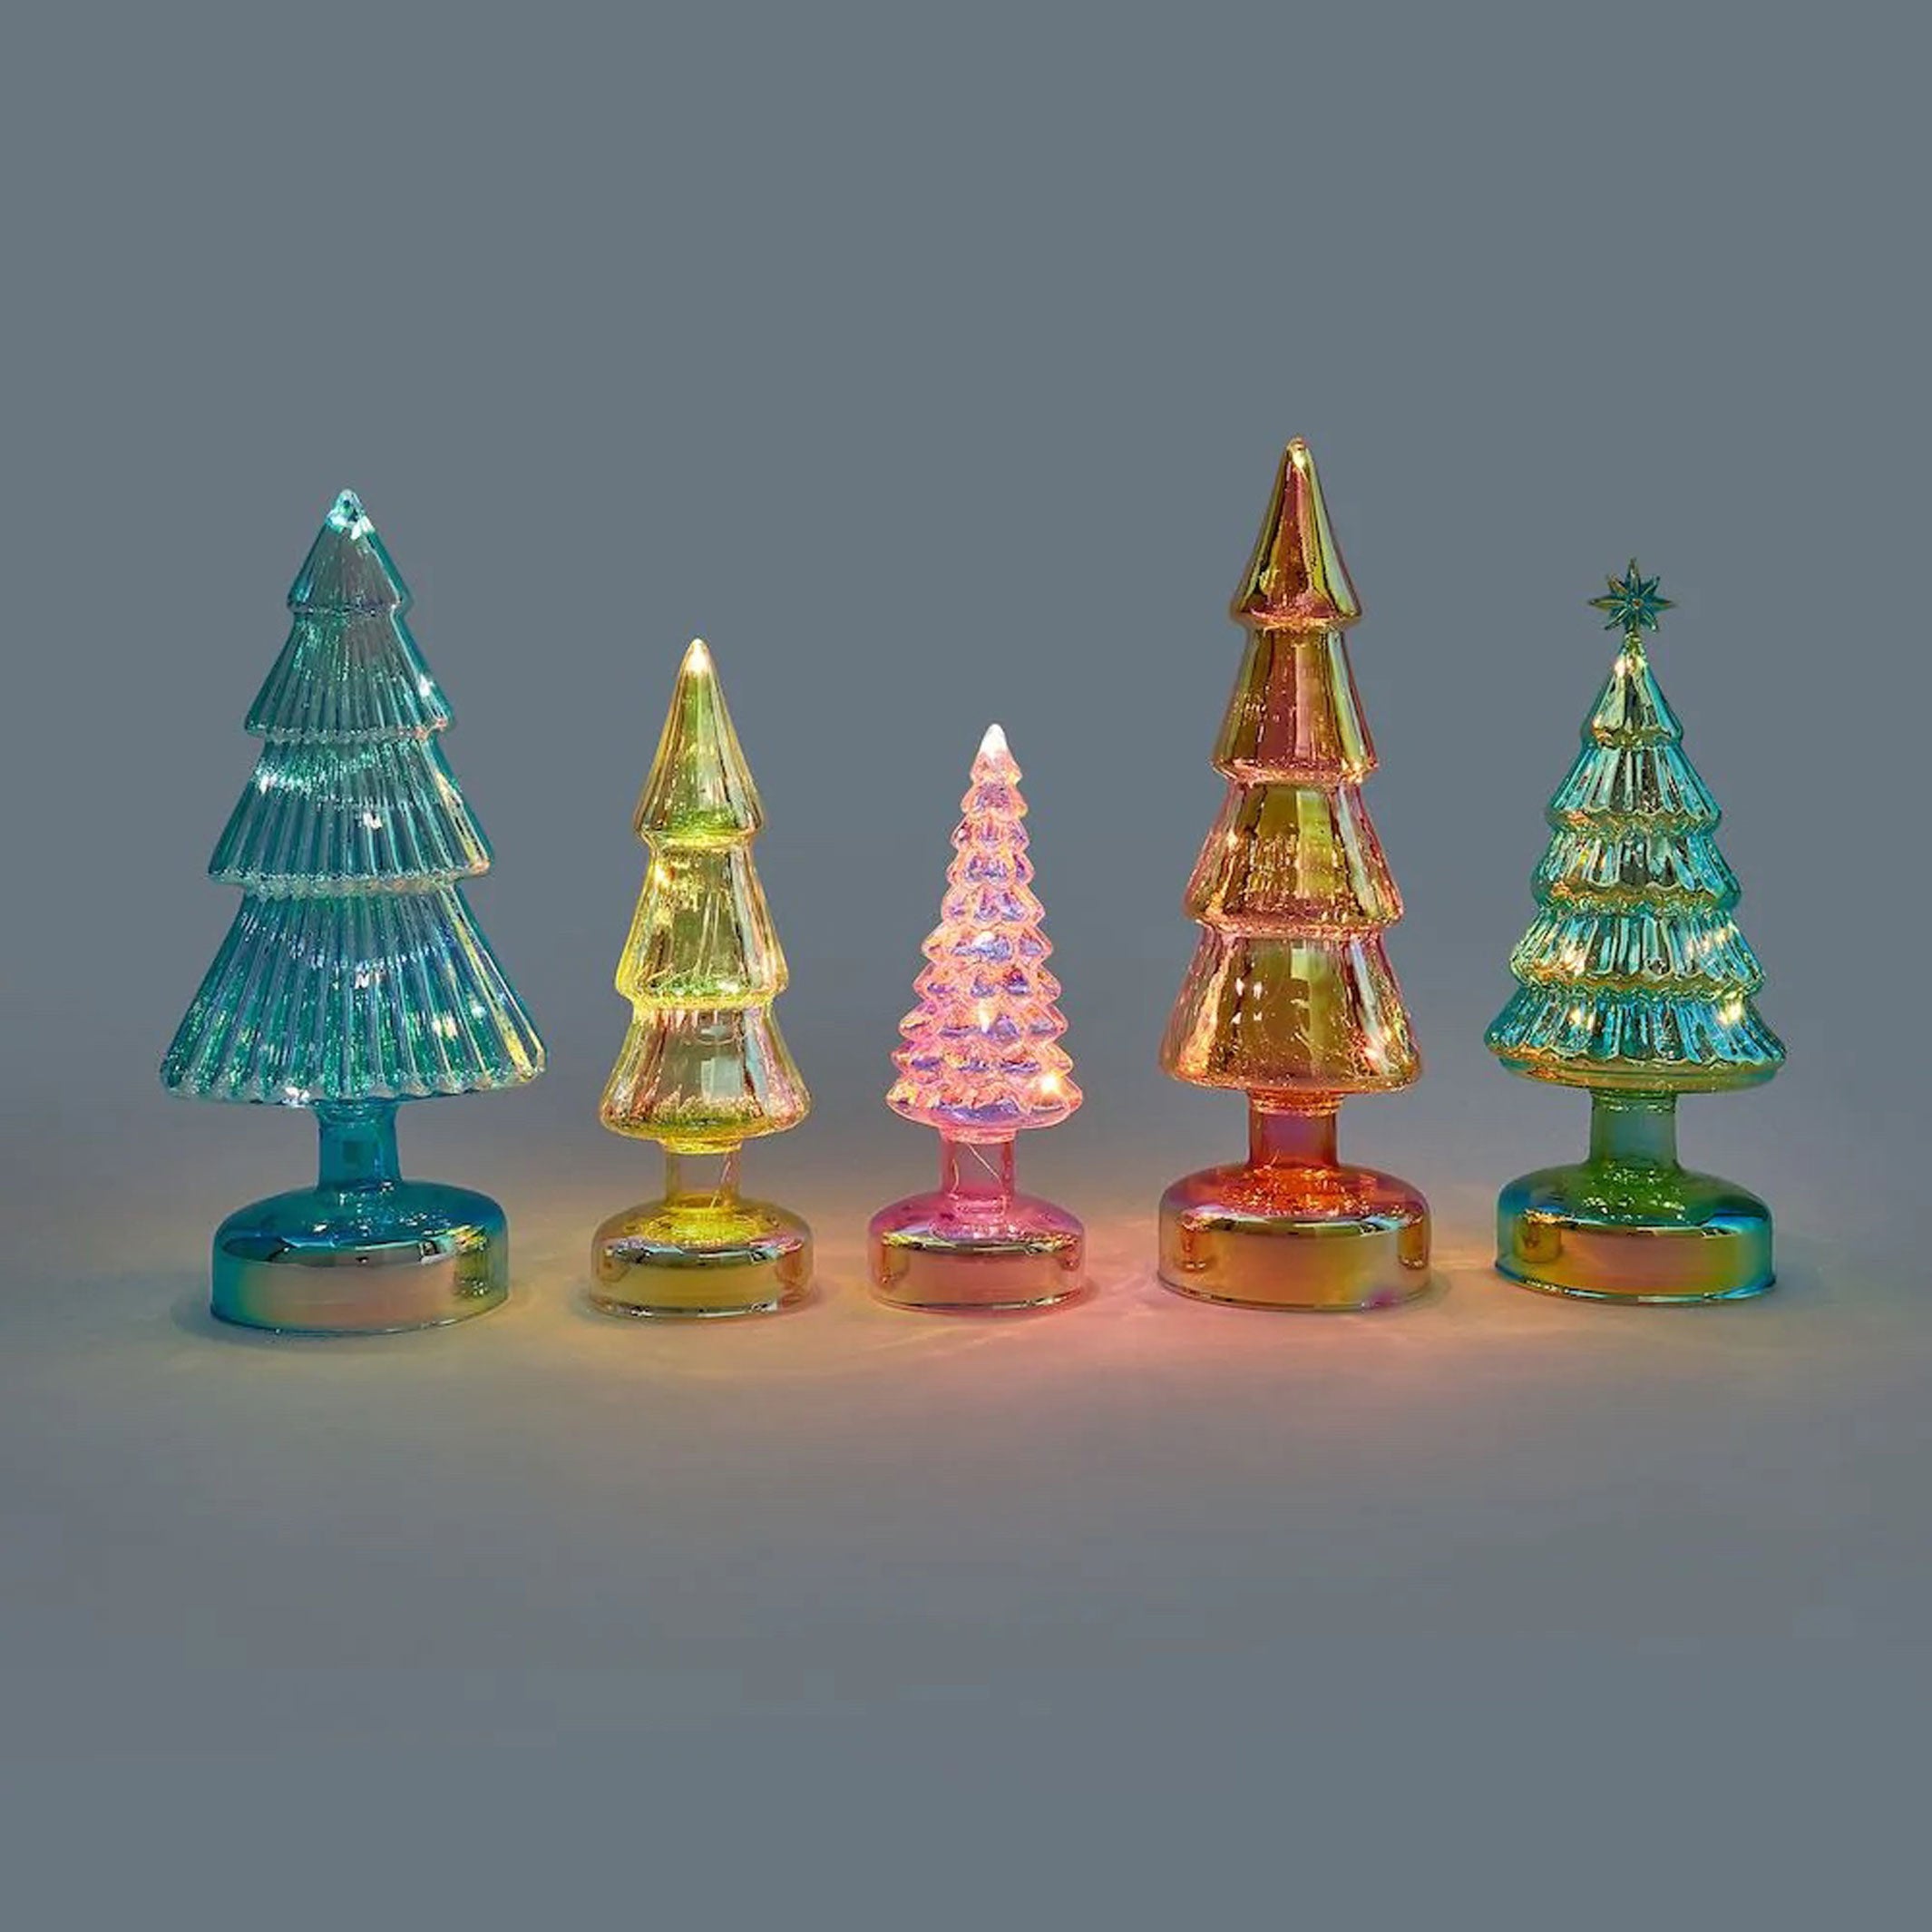 Colorful mit LED Small GLASS Glas-TANNENBÄUME TREES | LED LIGHTED Bele